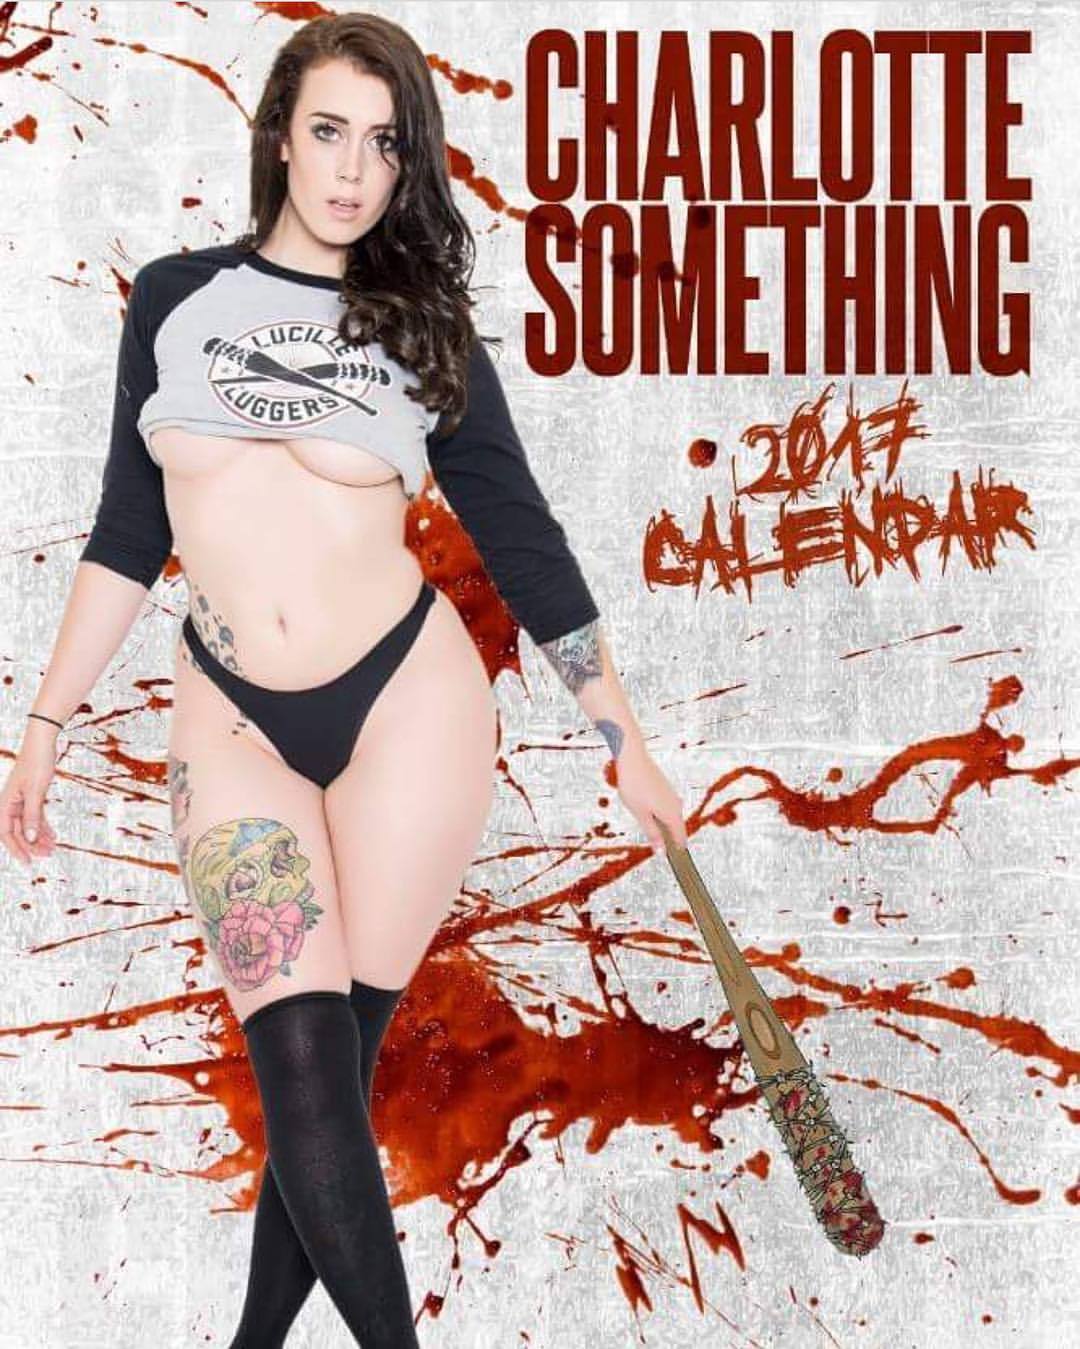 eliteonlinemag:  We’re excited to launch the limited edition version of @charlotte_something